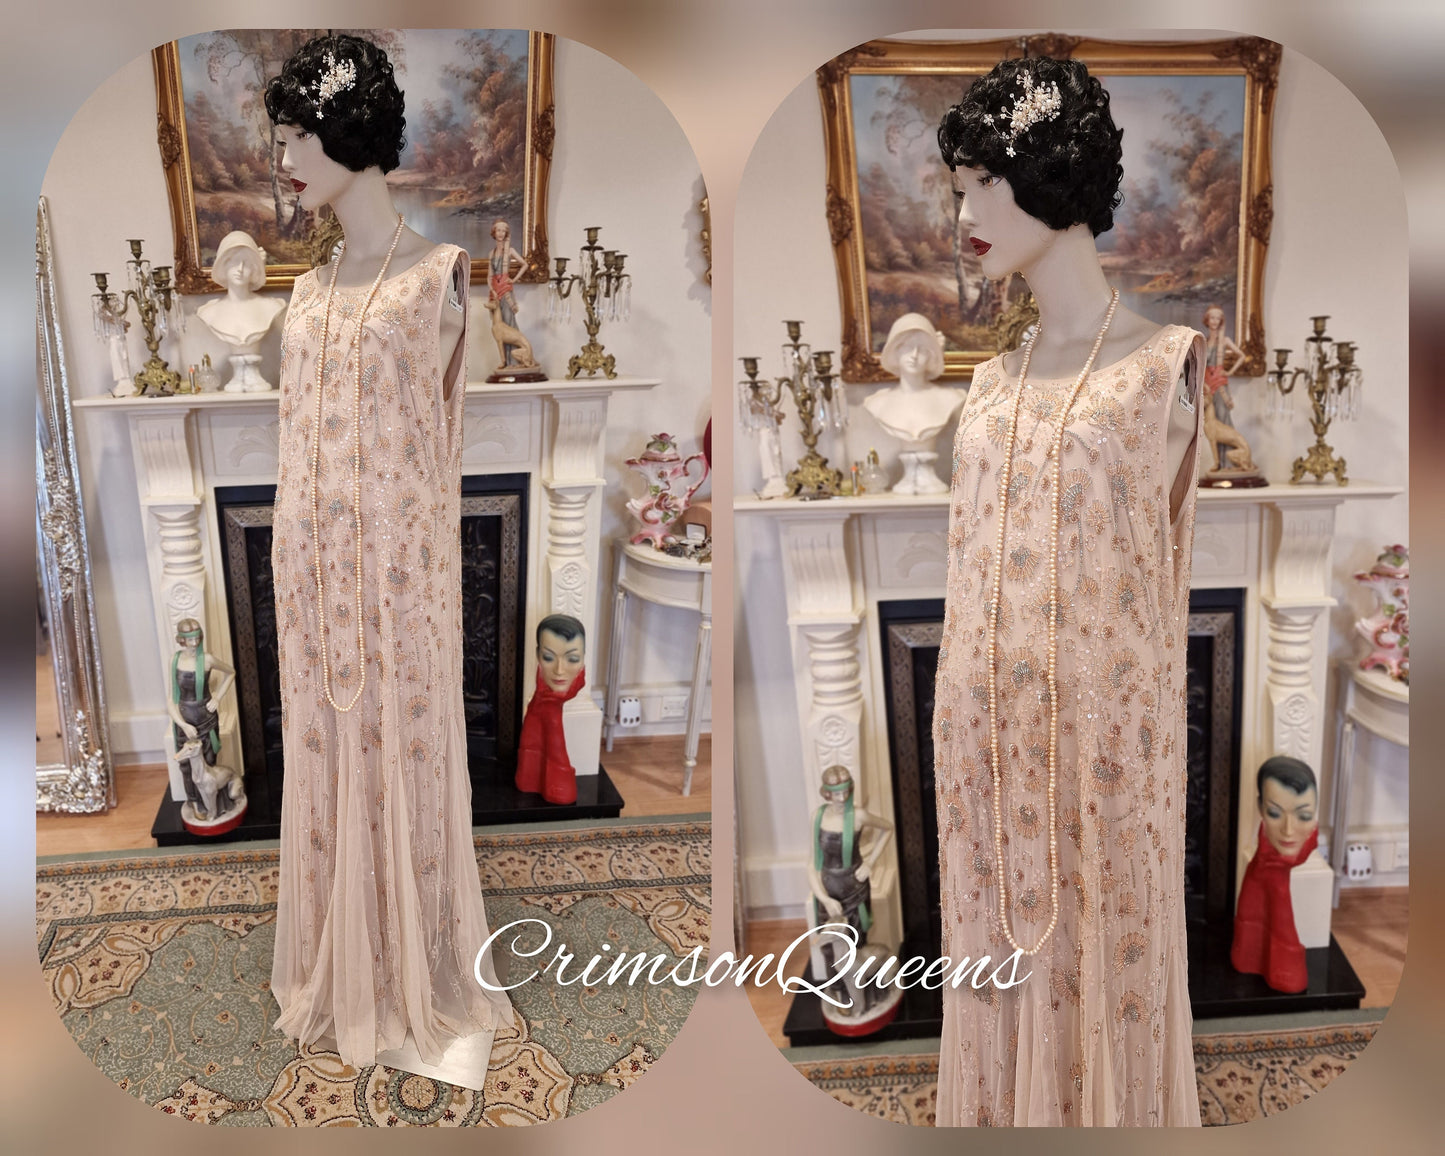 Divine Vintage nude Lady Rose Downton Abbey maxi beaded sequinned embellished dress 1920's flapper wedding occasion dress Size UK 20 US 16